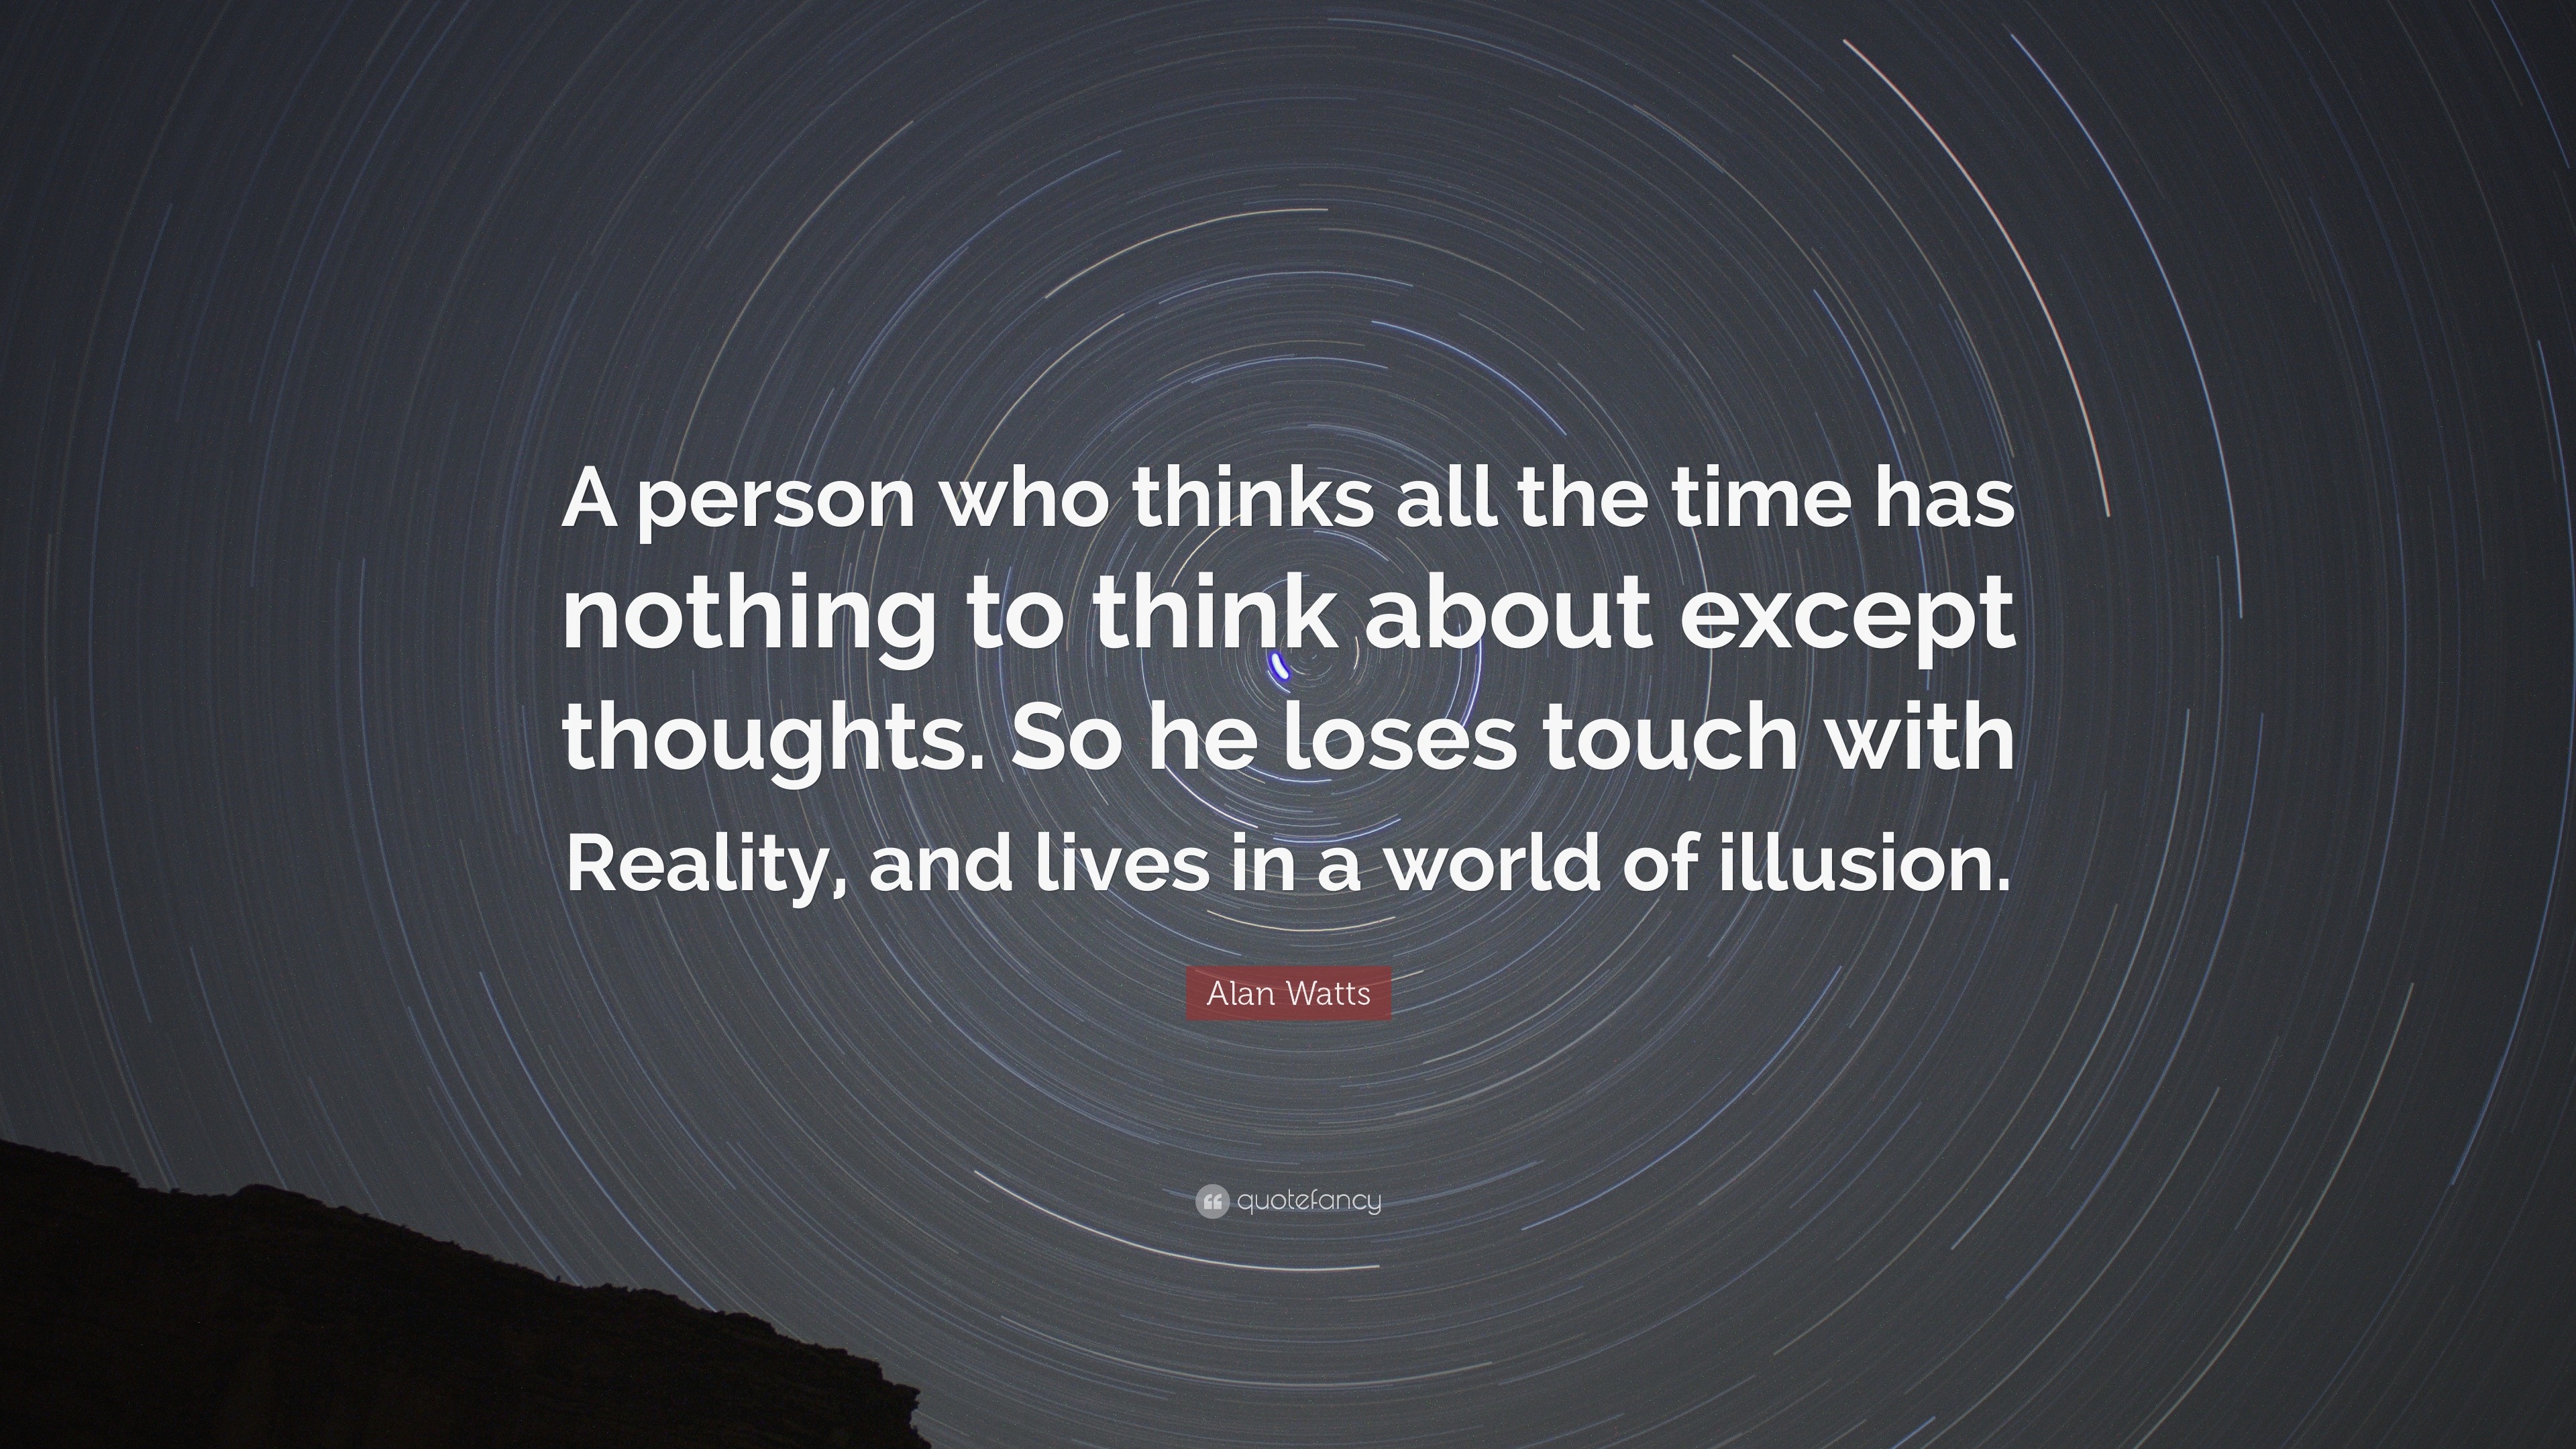 58249 Alan Watts Quote A person who thinks all the time has nothing to